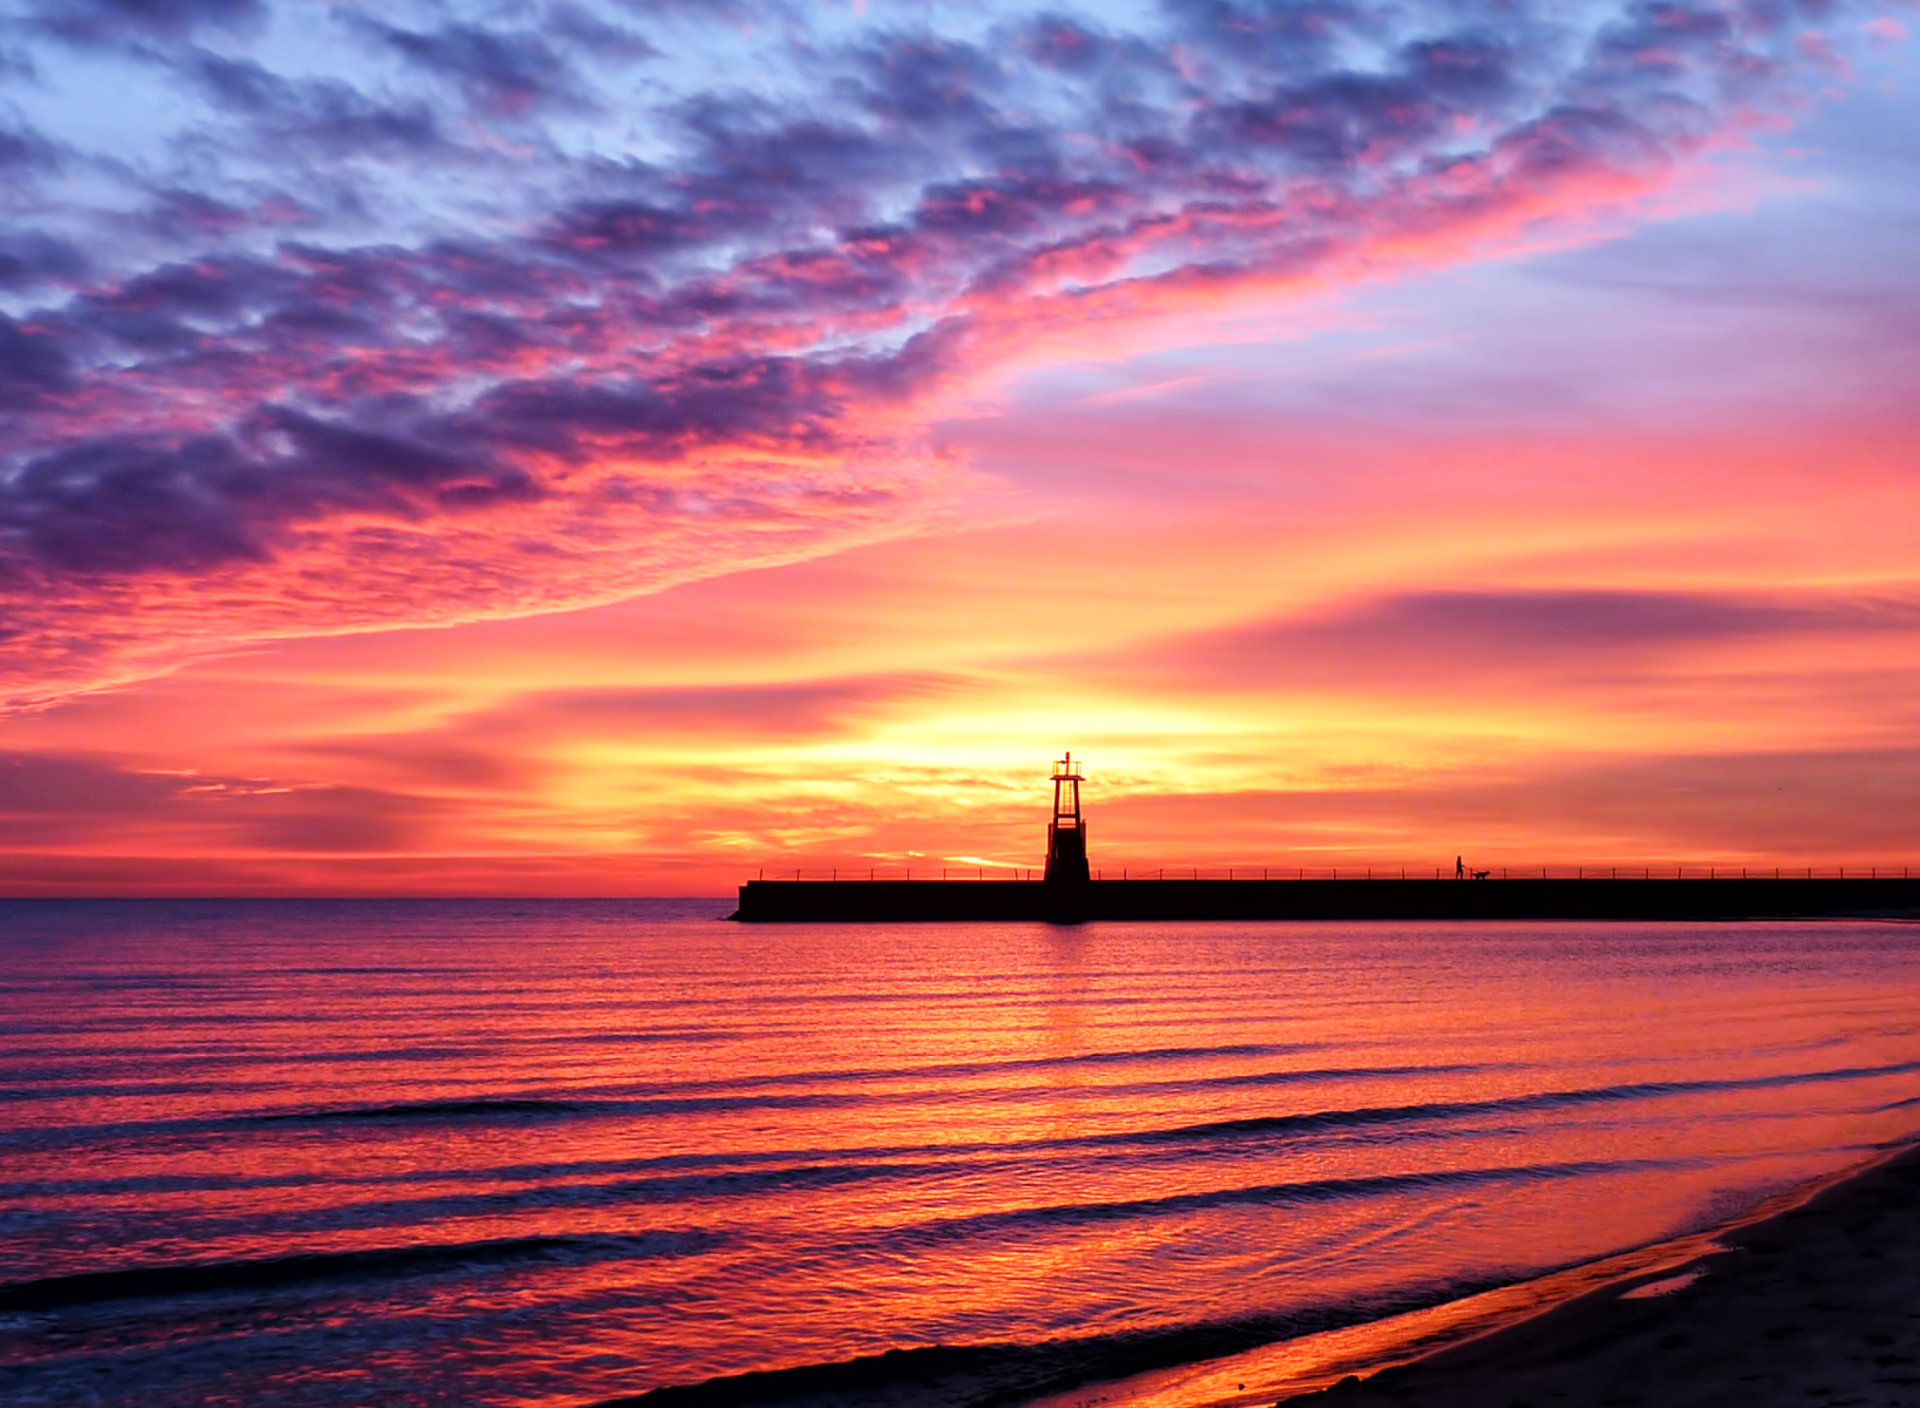 Lighthouse And Red Sunset Beach wallpaper 1920x1408